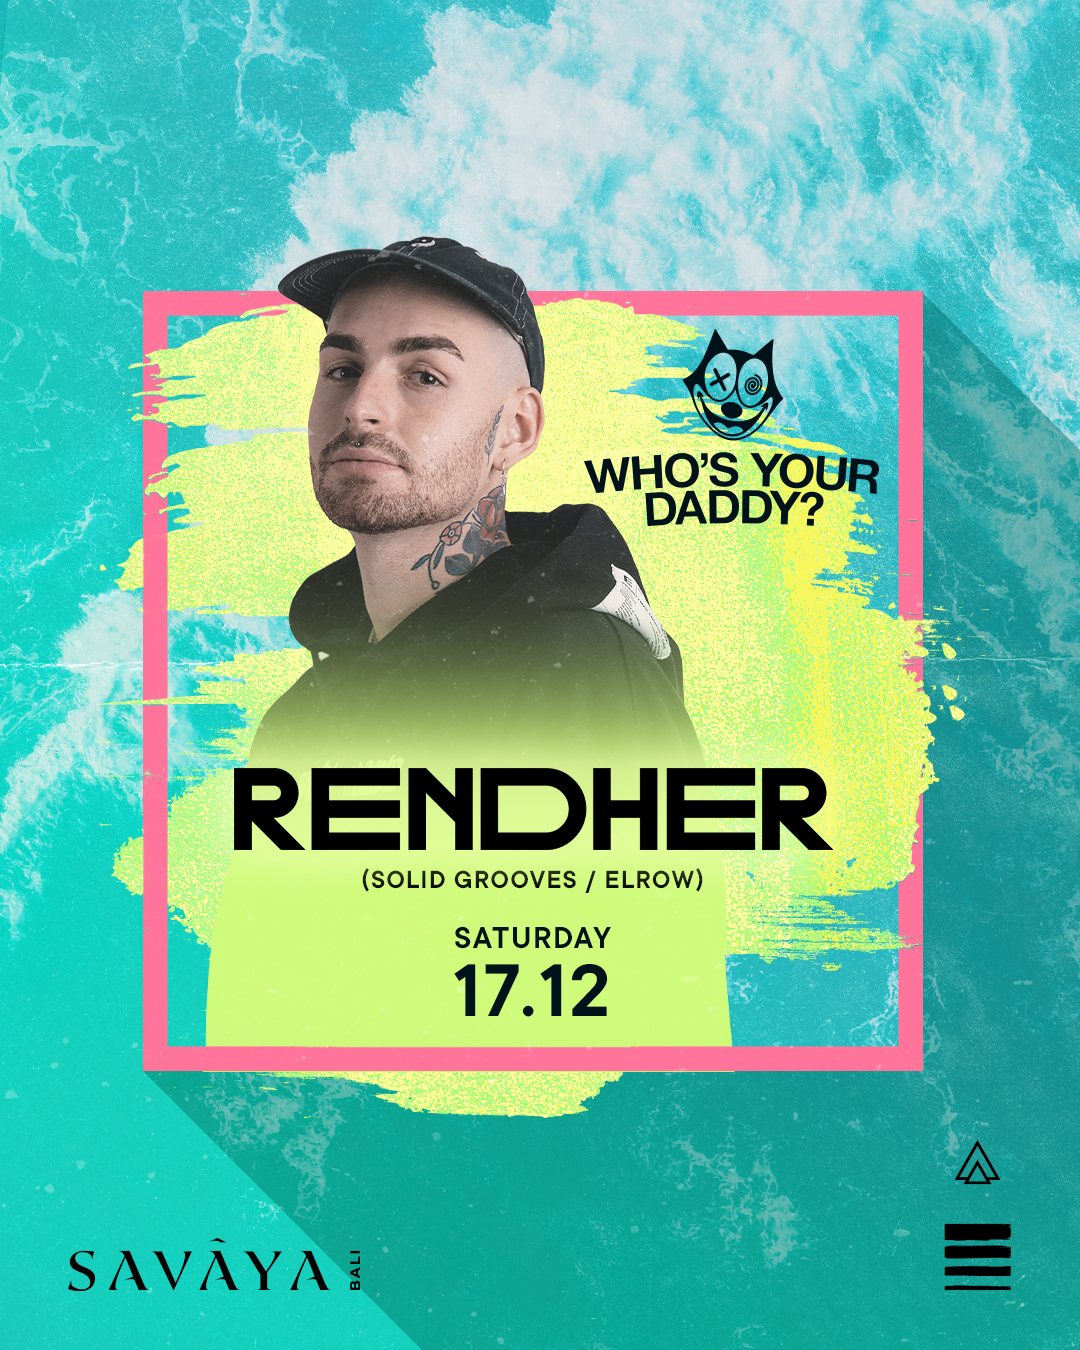 SAVAYA PRESENTS WHO’S YOUR DADDY FT. RENDHER – SATURDAY DECEMBER 17TH thumbnail image